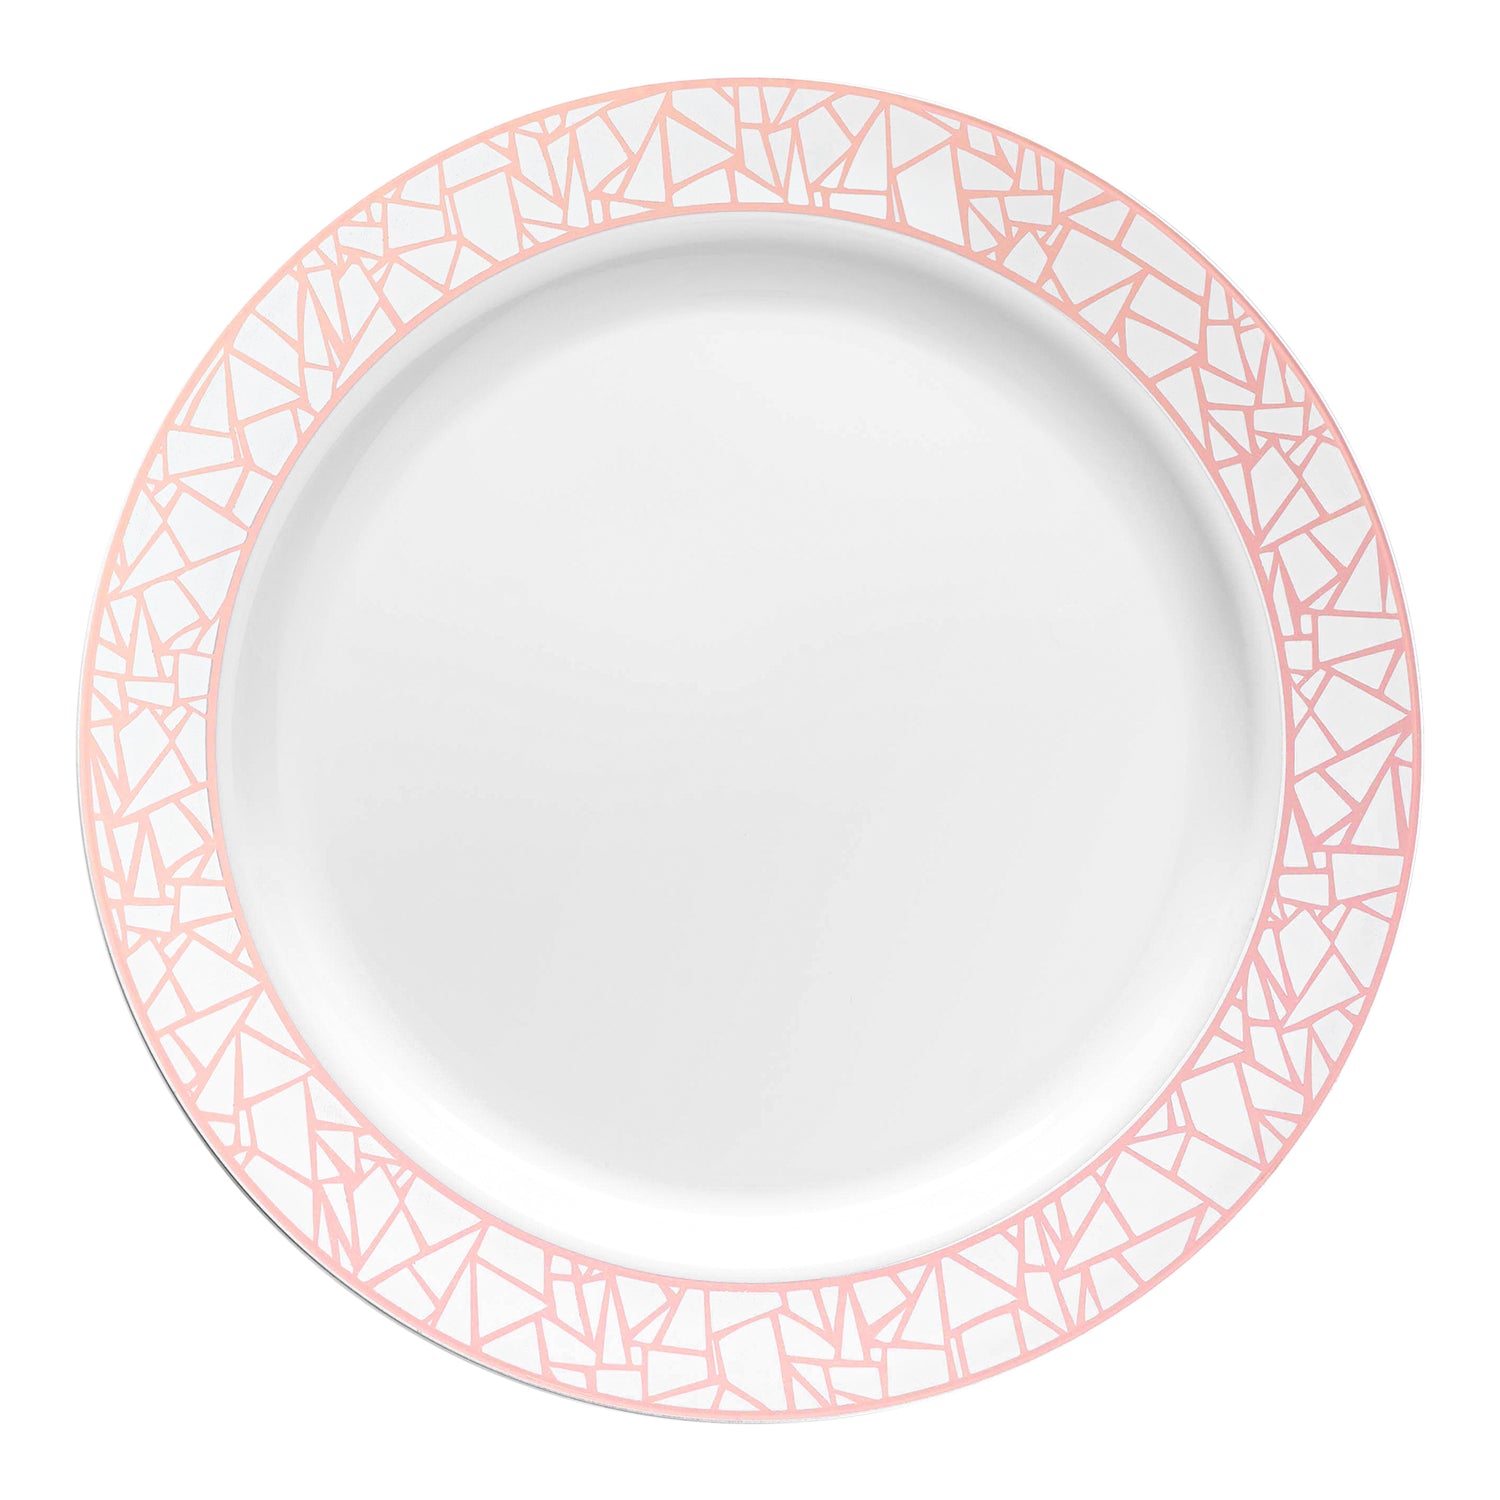 White with Silver and Rose Gold Mosaic Rim Round Plastic Appetizer/Salad Plates (7.5") | The Kaya Collection